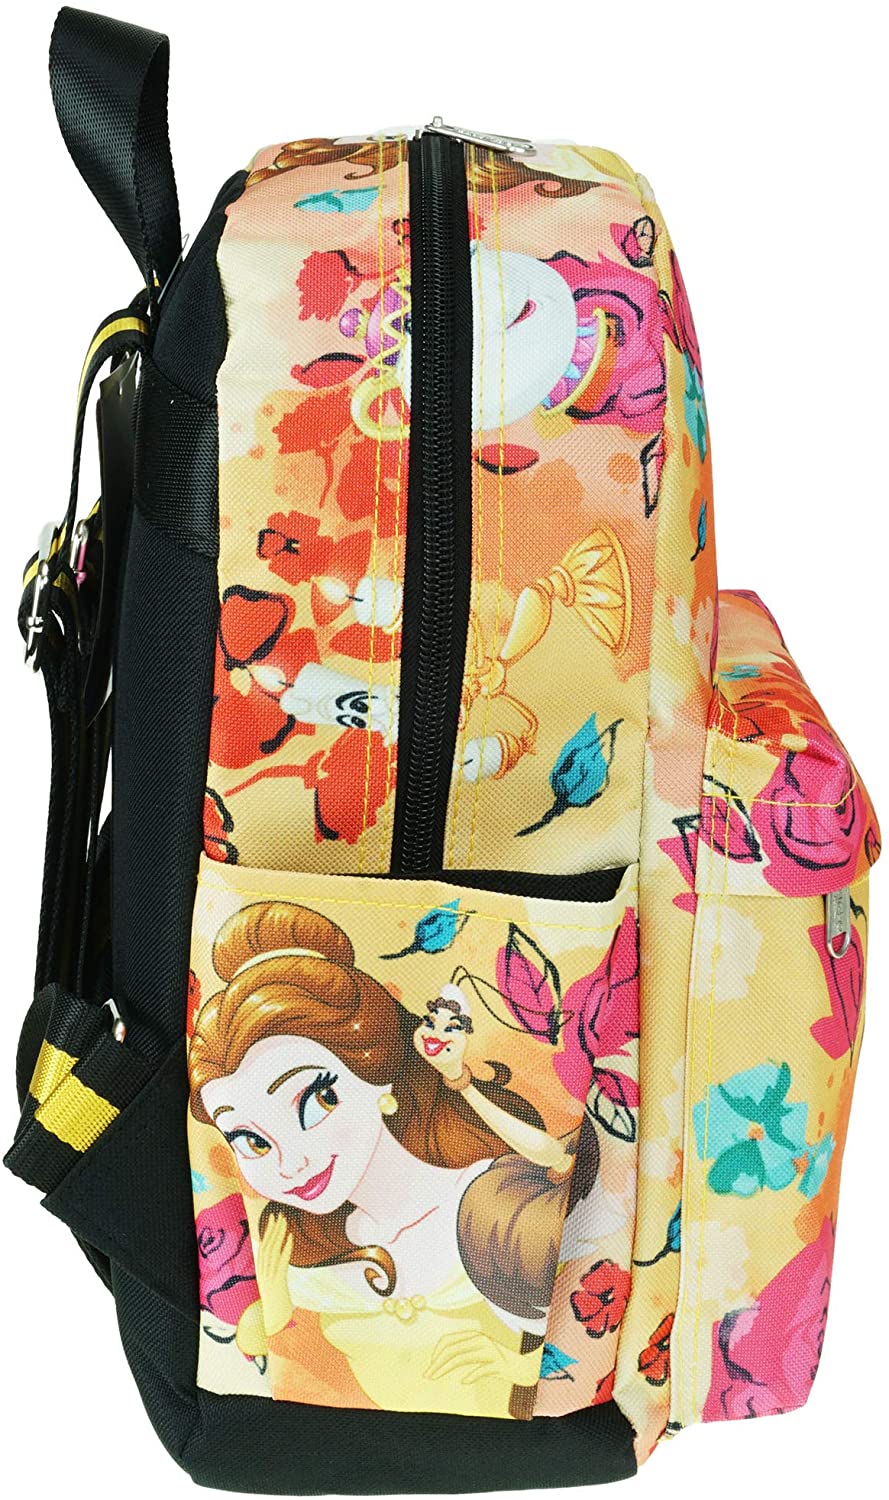 Beauty and the Beast 12" Deluxe Oversize Print Daypack - A21306 - GTE Zone